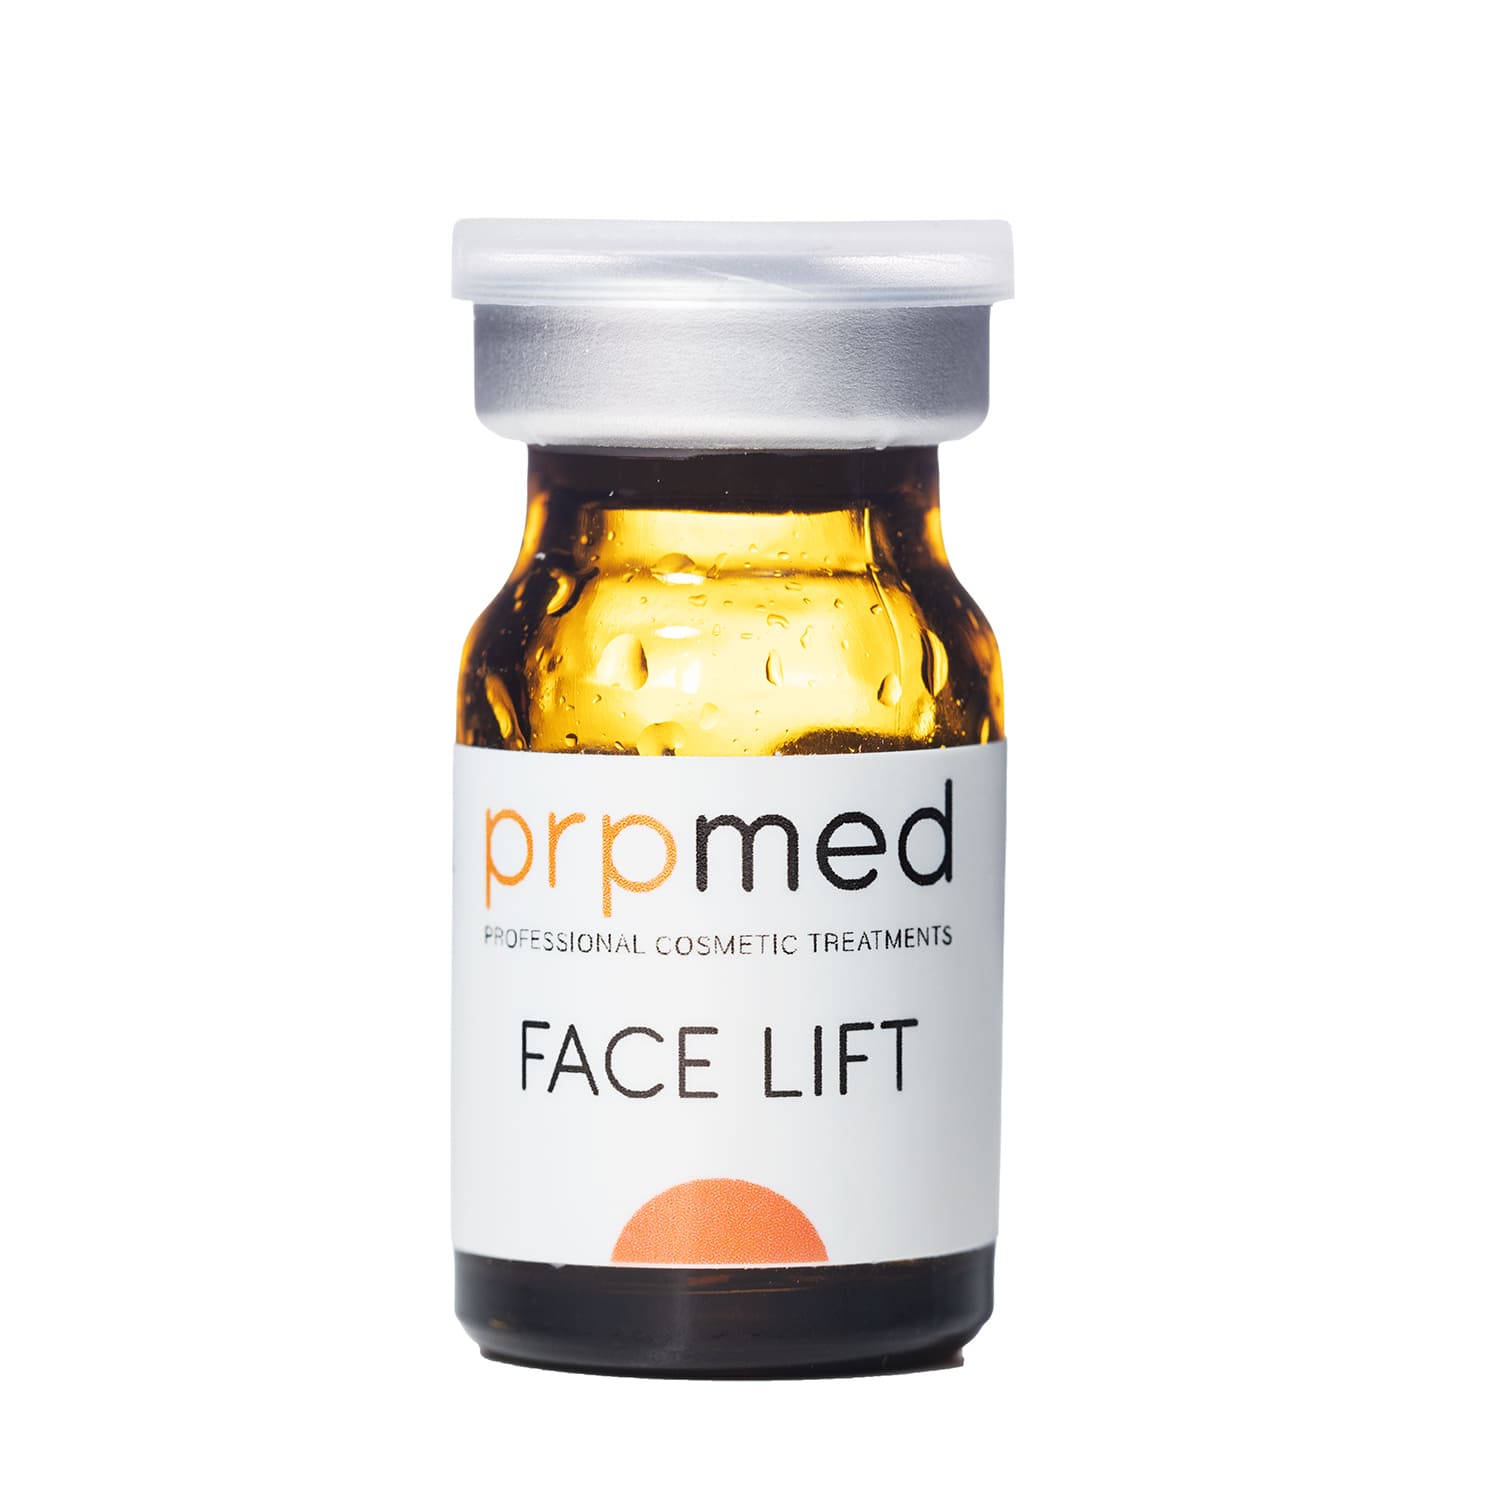 Face Lift Microneedling Serum von Prpmed Professional Cosmetic Treatments